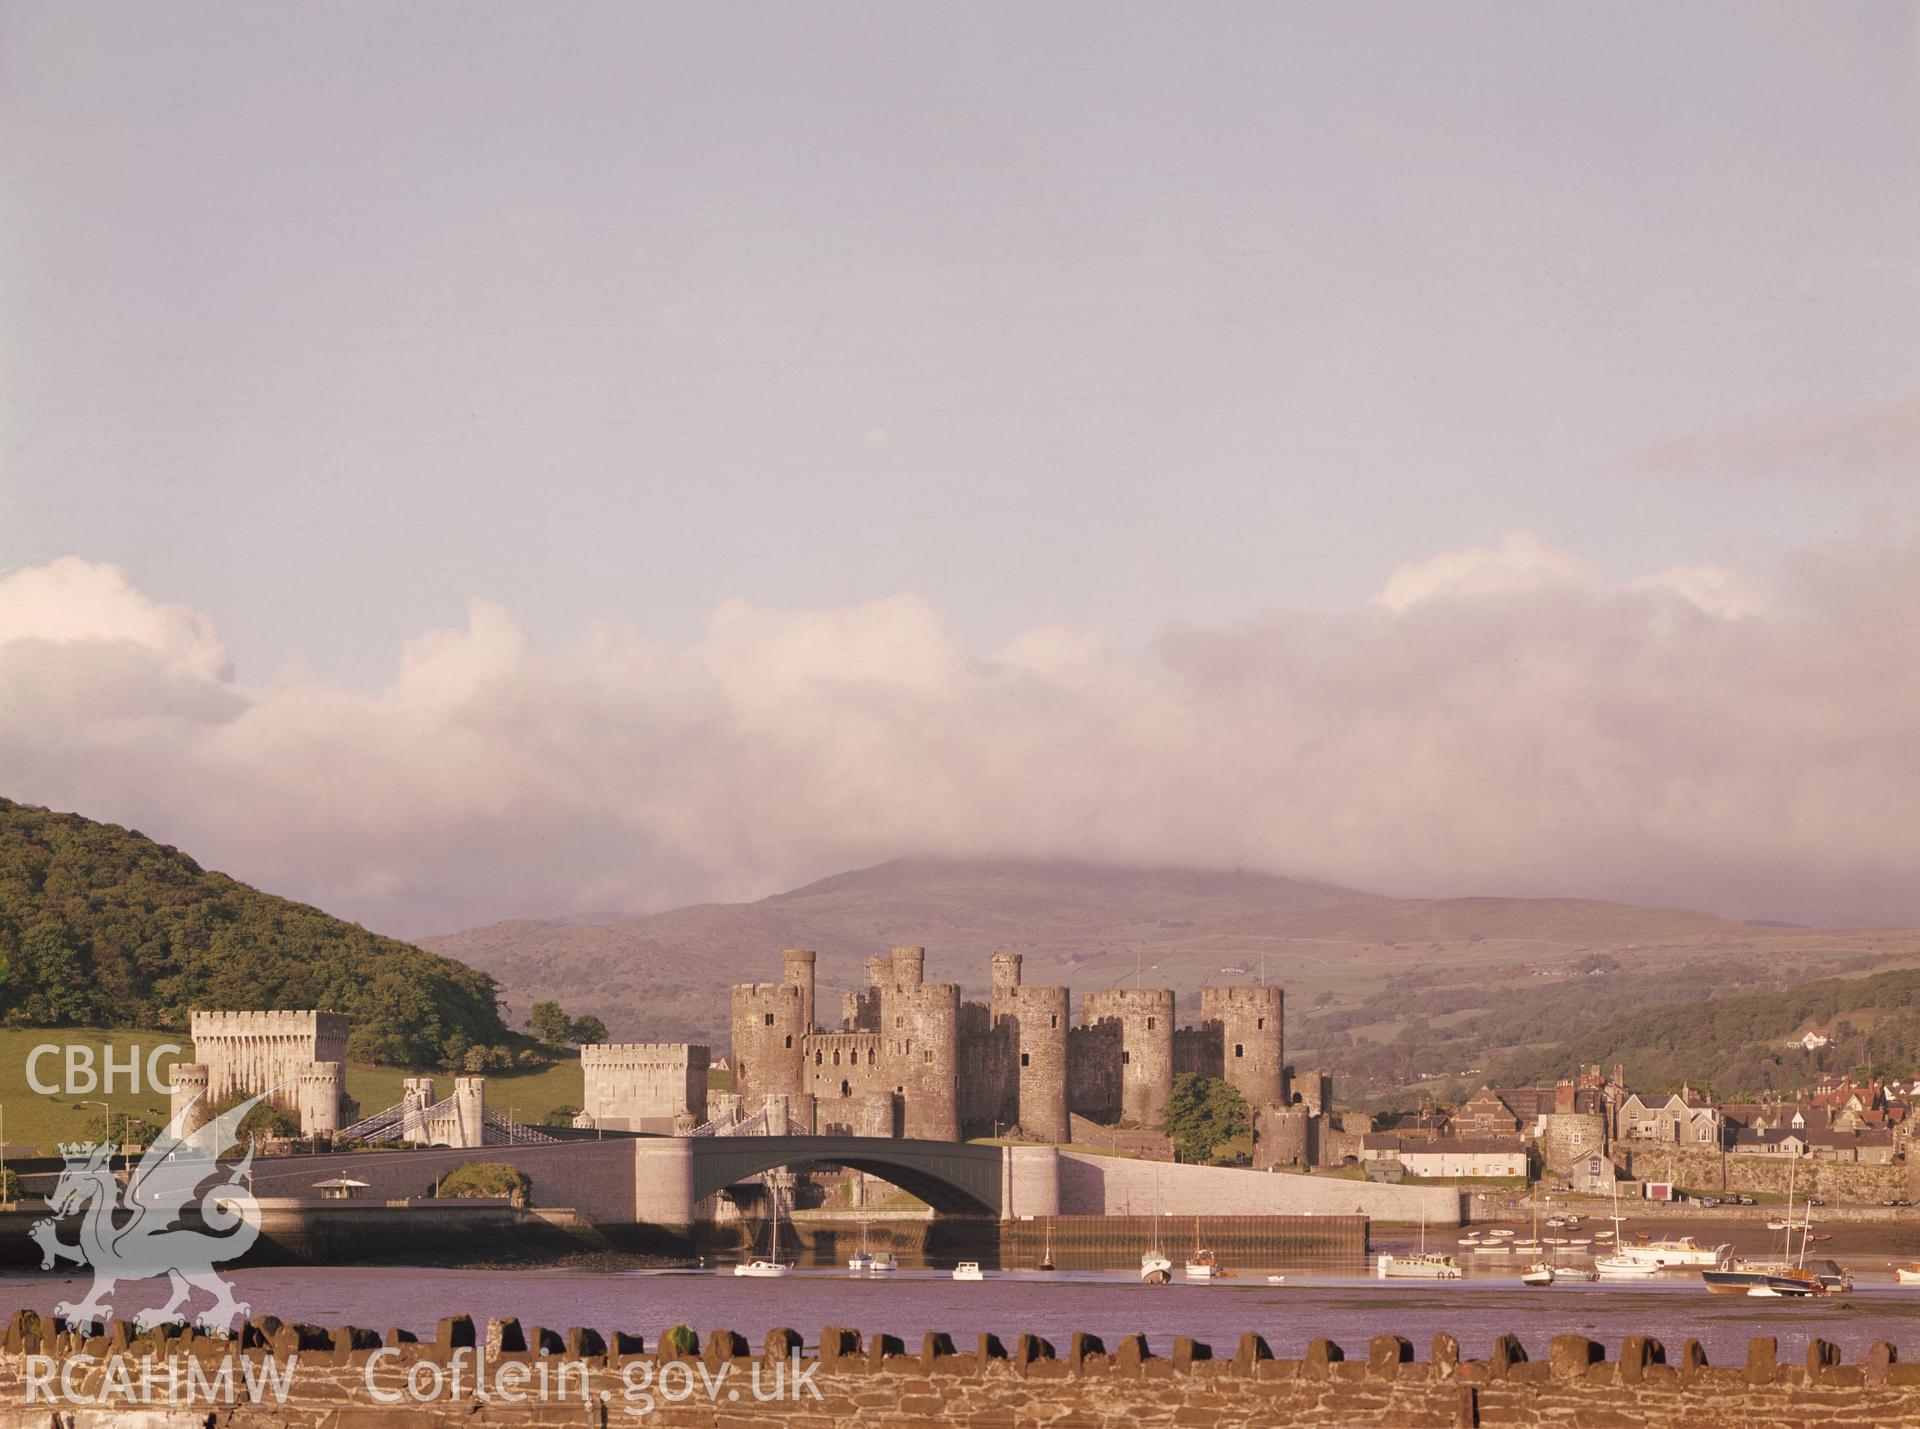 1 colour transparency showing view of Conwy castle, undated; collated by the former Central Office of Information.